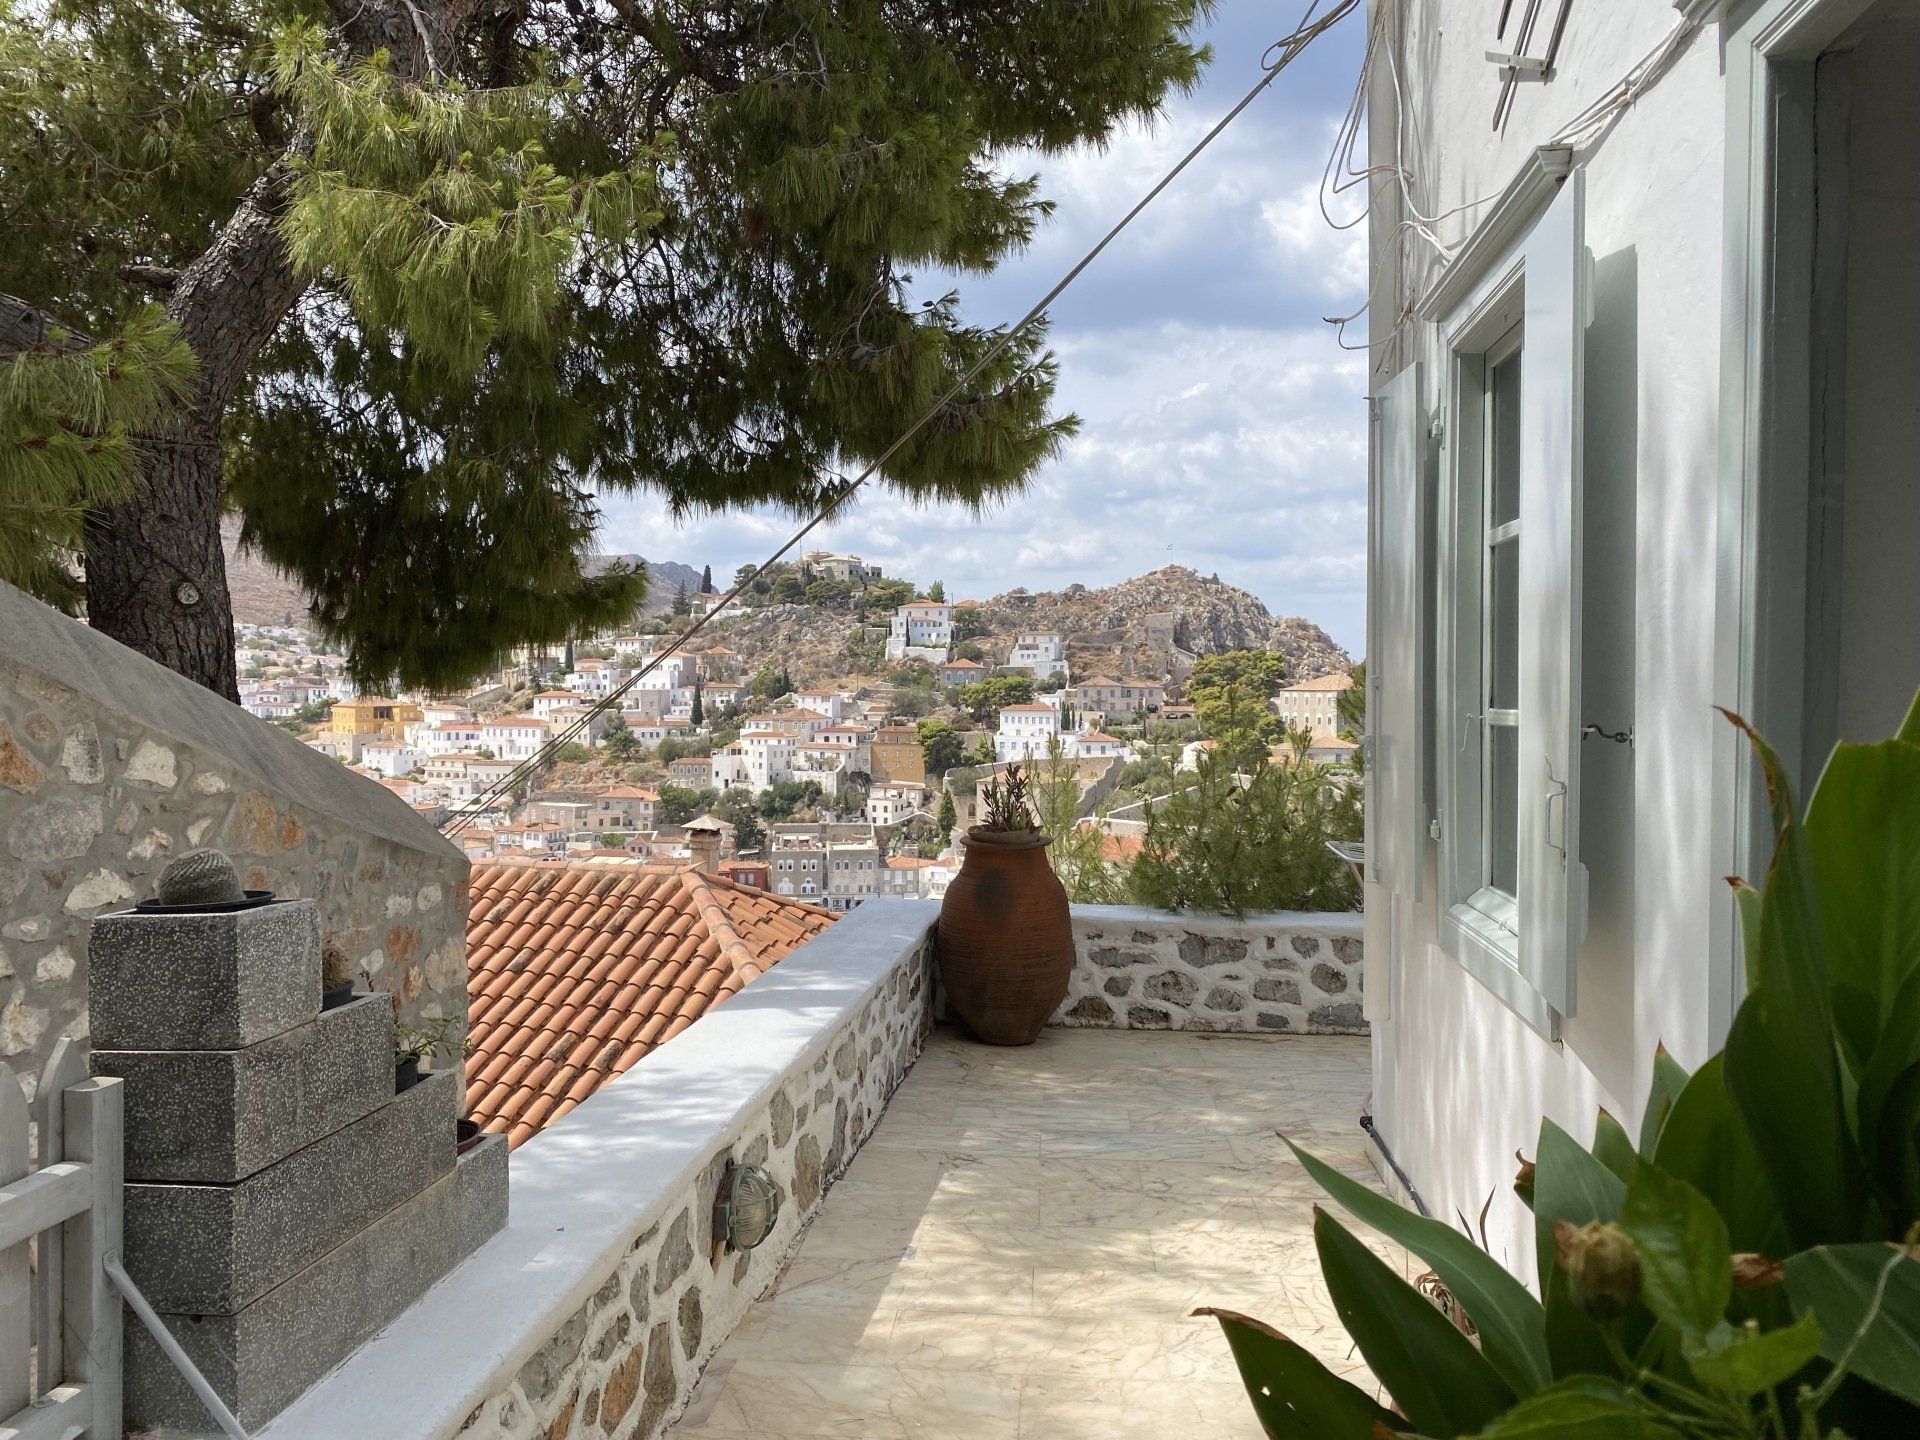 Apartment for sale overlooking Hydra harbour on Hydra Island, Greece.